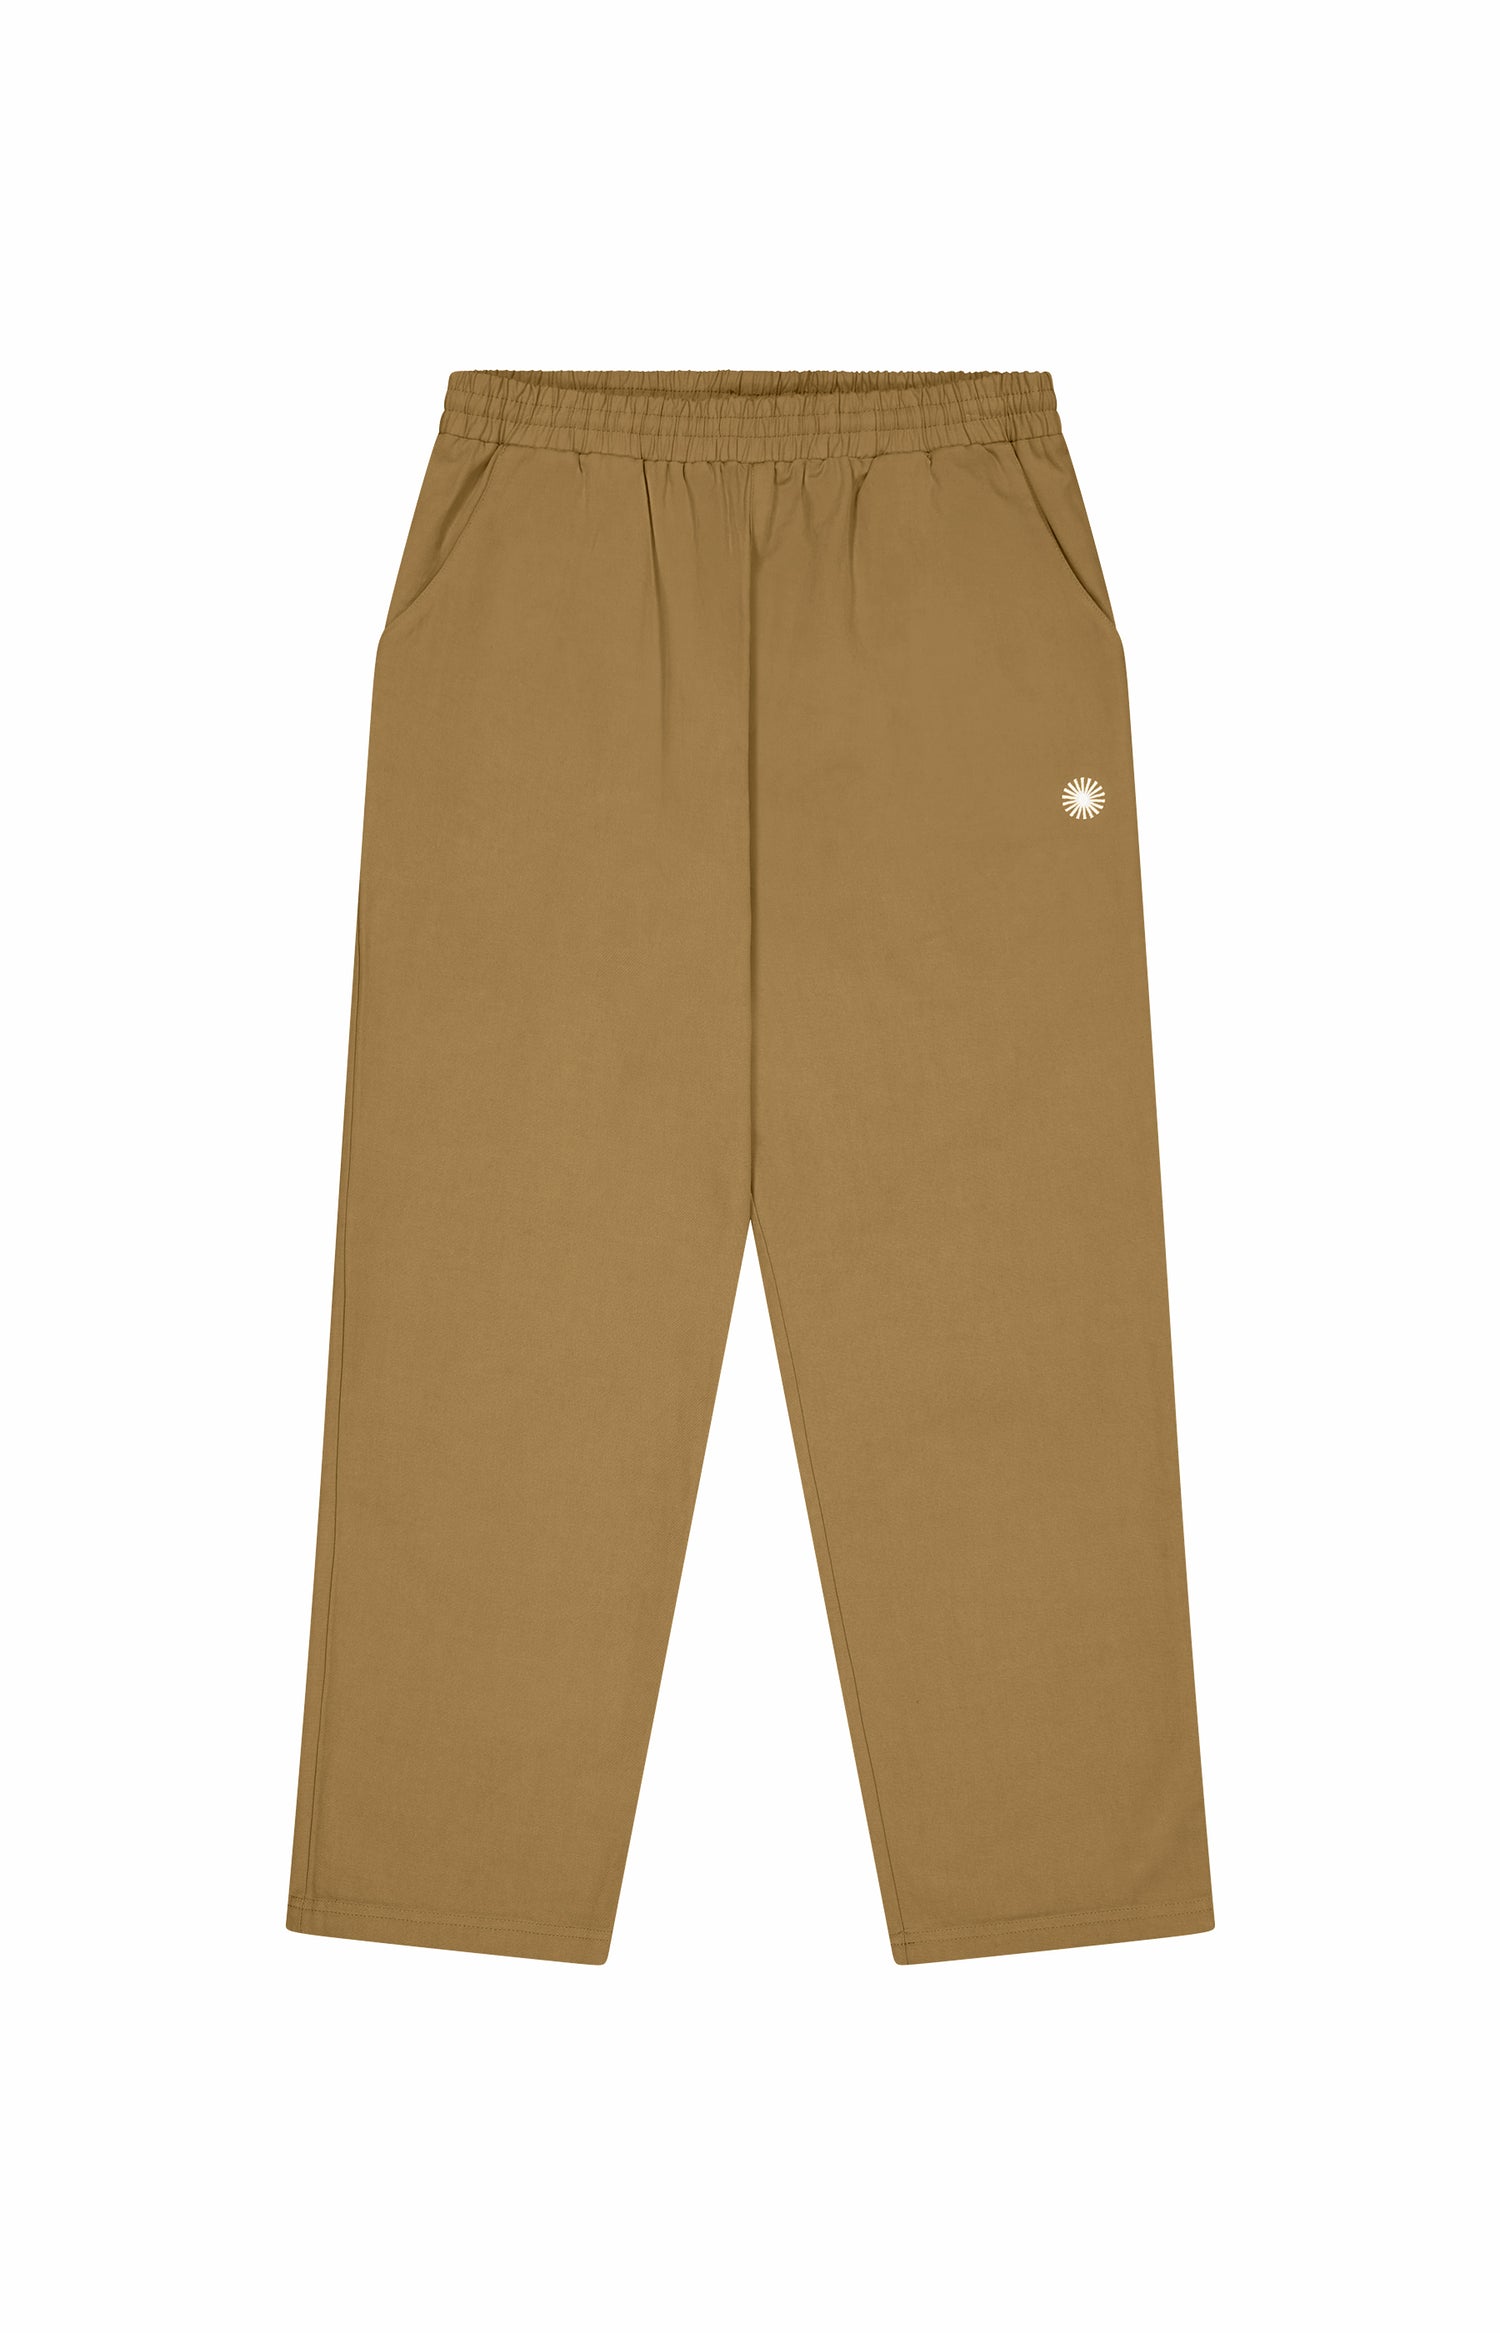 Front of beige pants with small sun logo, two pockets and elastic waistband